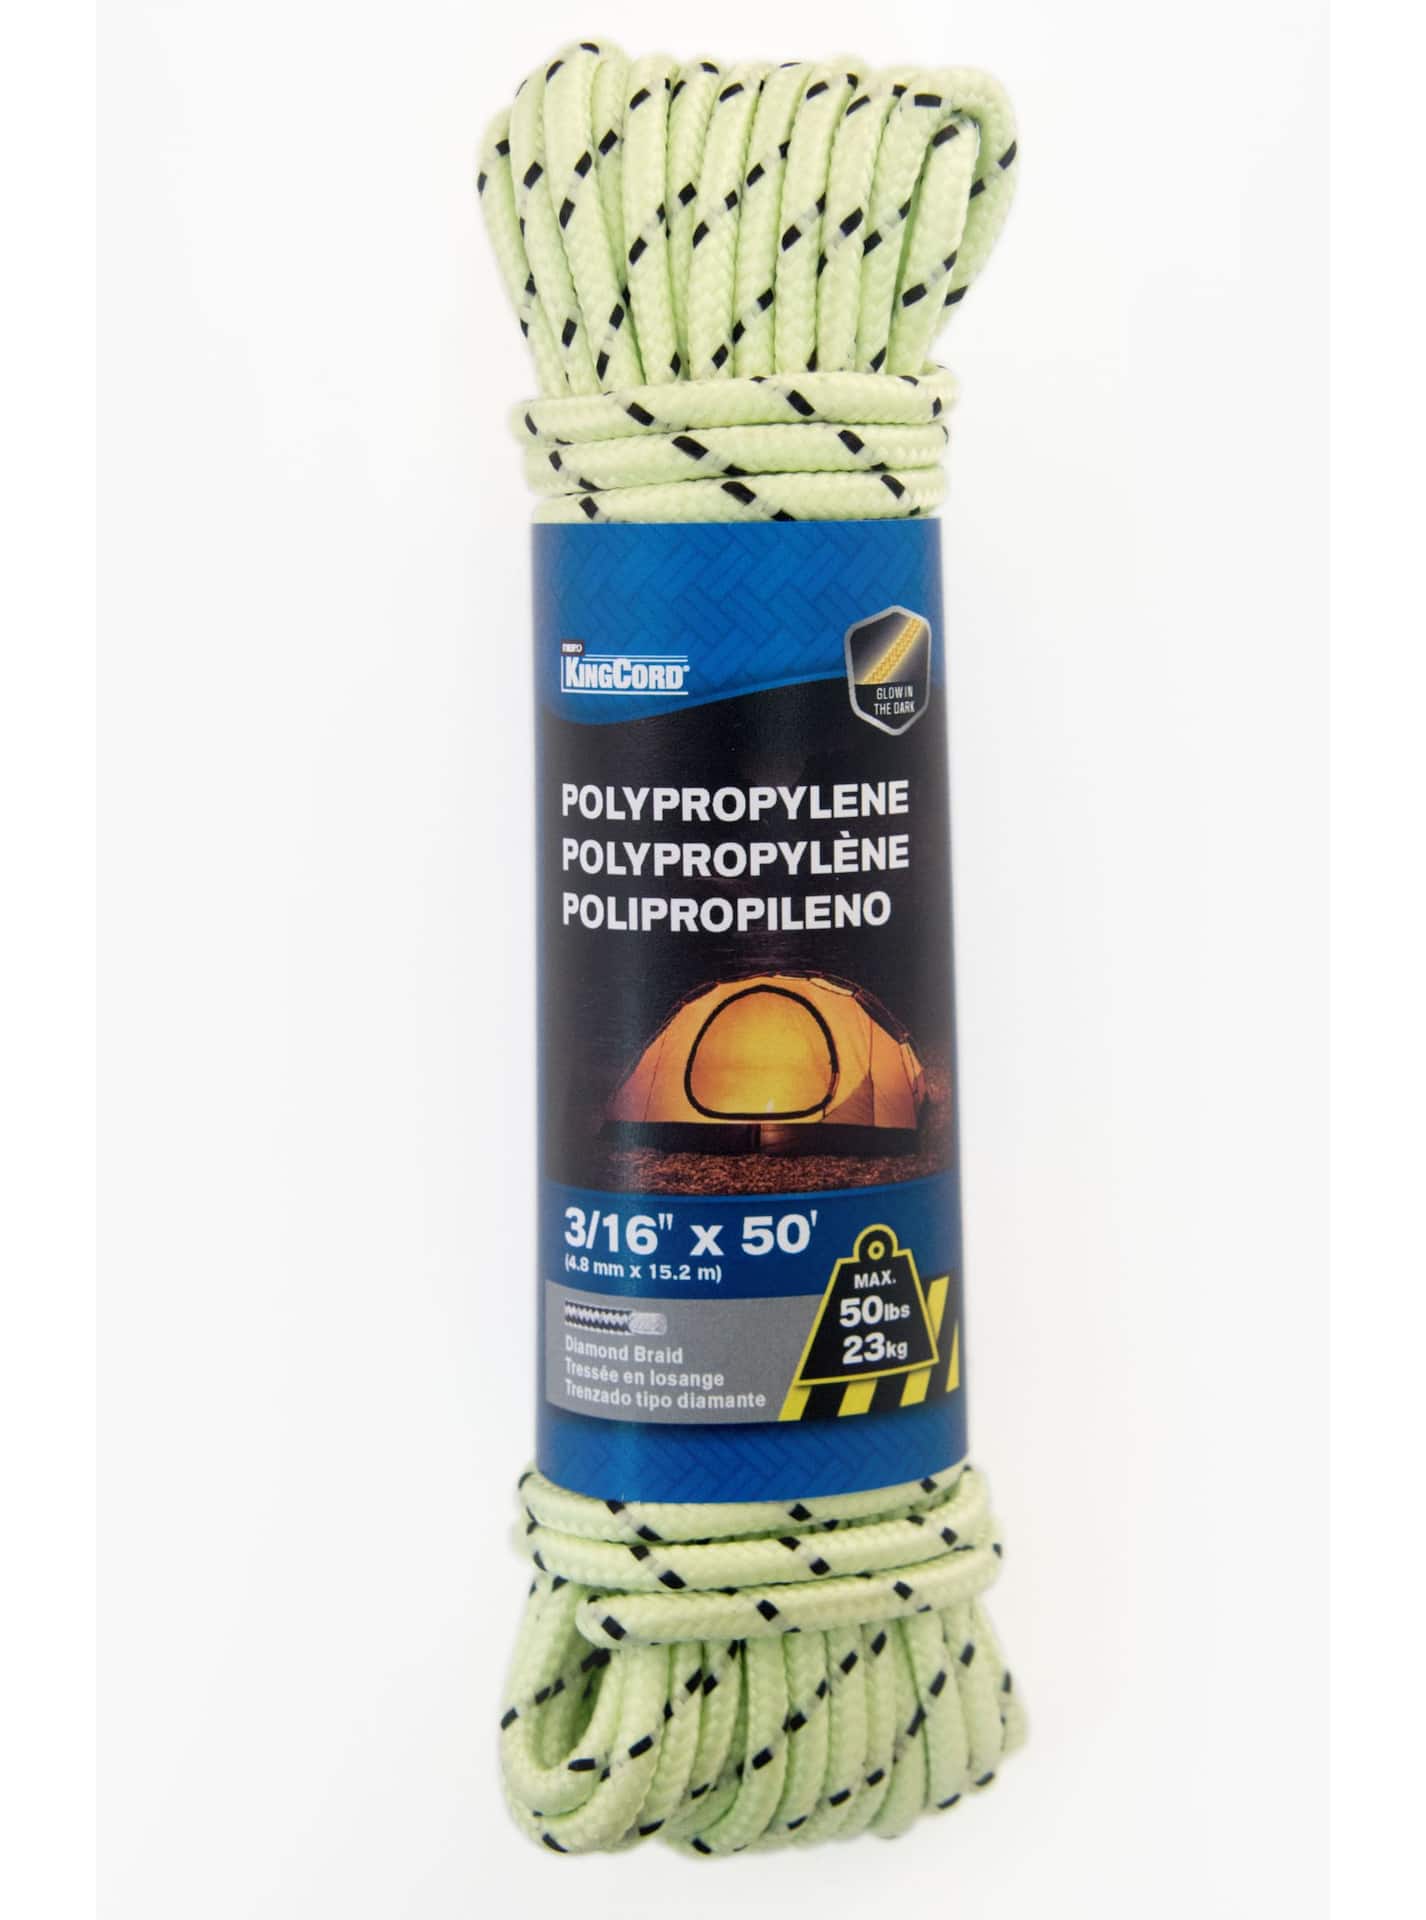 Nylon Rope Braided 100 x 3/16 Low Stretch All-Purpose High Strength, Lightweight and Durable Clothes Line, Multi Utility Cord, Household Essential